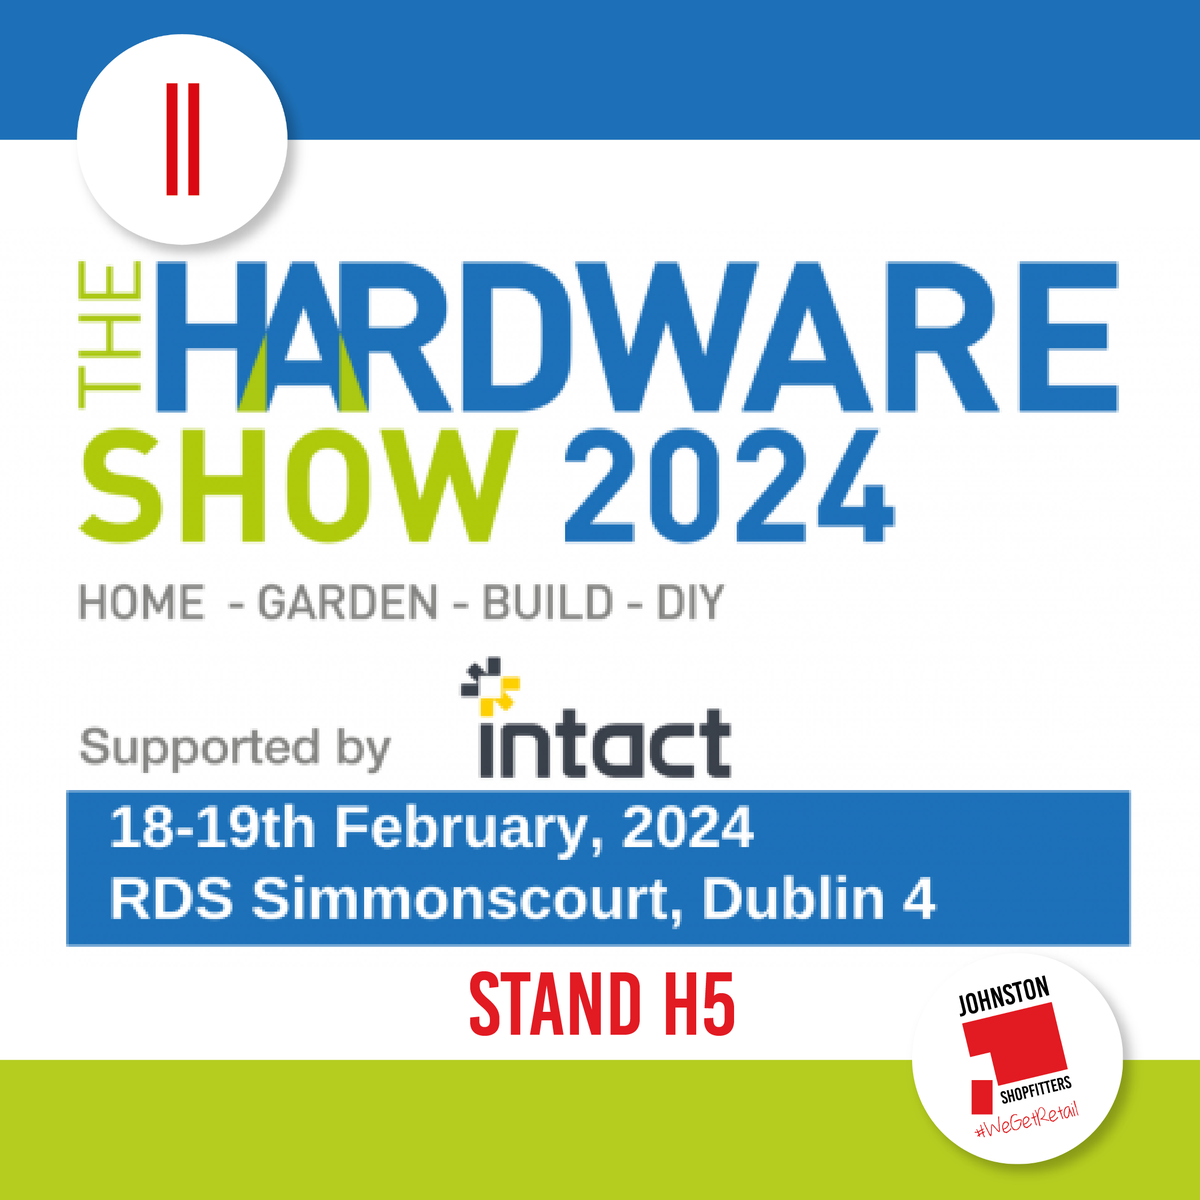 Team #JohnstonFitoutGroup will be at this year’s @Hardwareassoc Show @TheRDS this Sun & Mon 18th-19th Feb. If you are attending, we would love to meet you at Stand H5 to outline the many services of our group companies #JSFitout #JohnstonShopfitters #JohnstonRetailServices #RDS